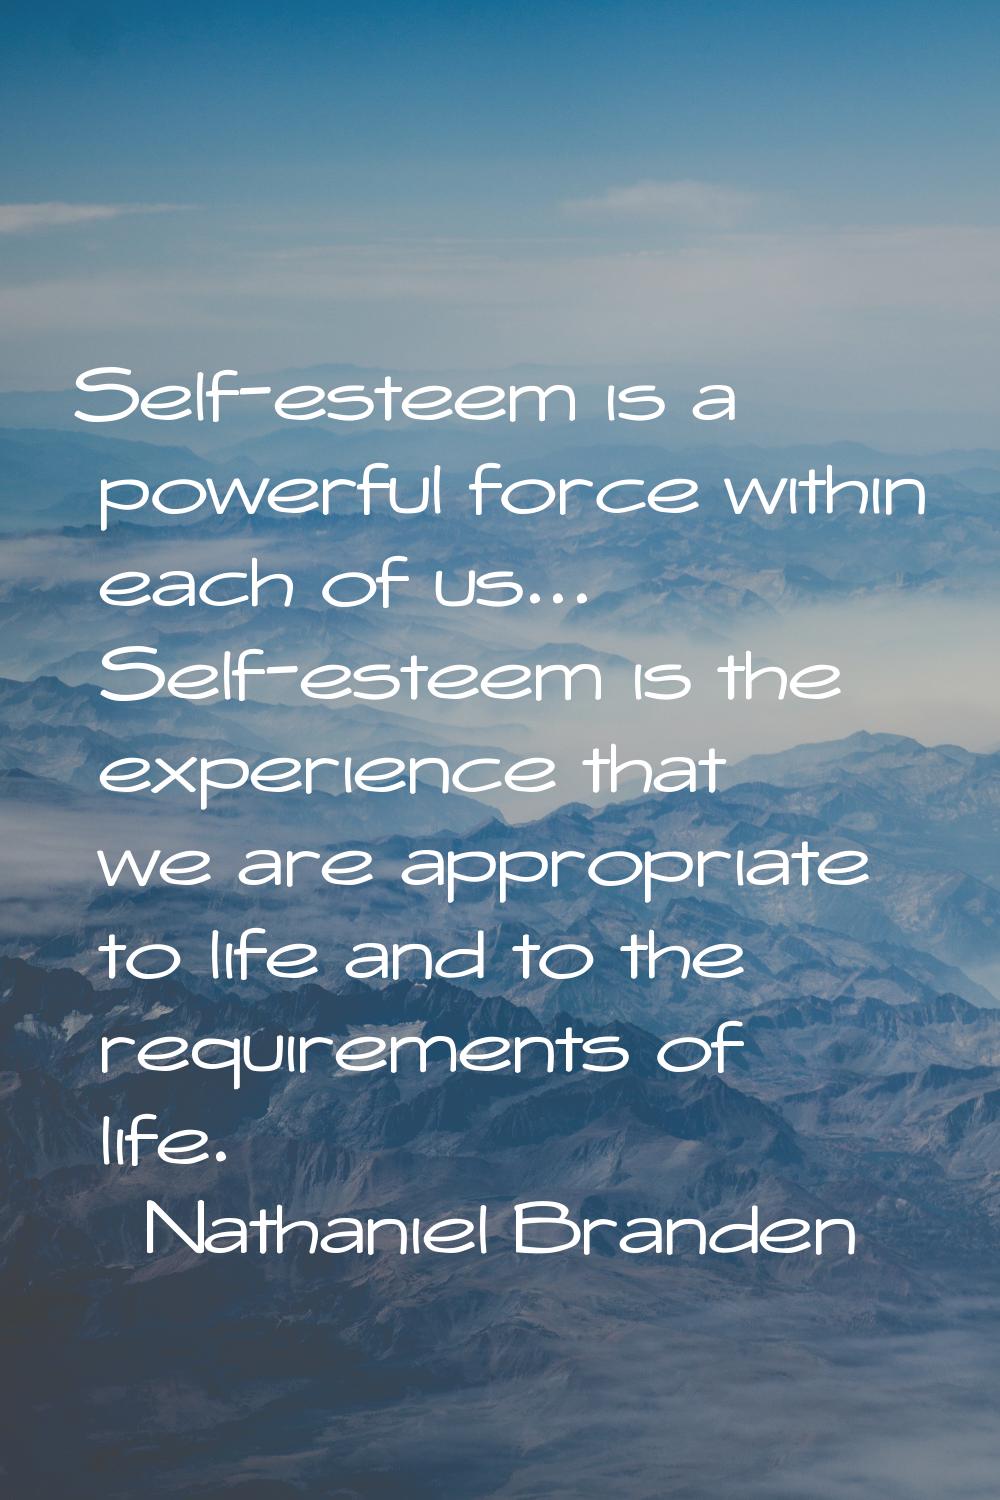 Self-esteem is a powerful force within each of us... Self-esteem is the experience that we are appr